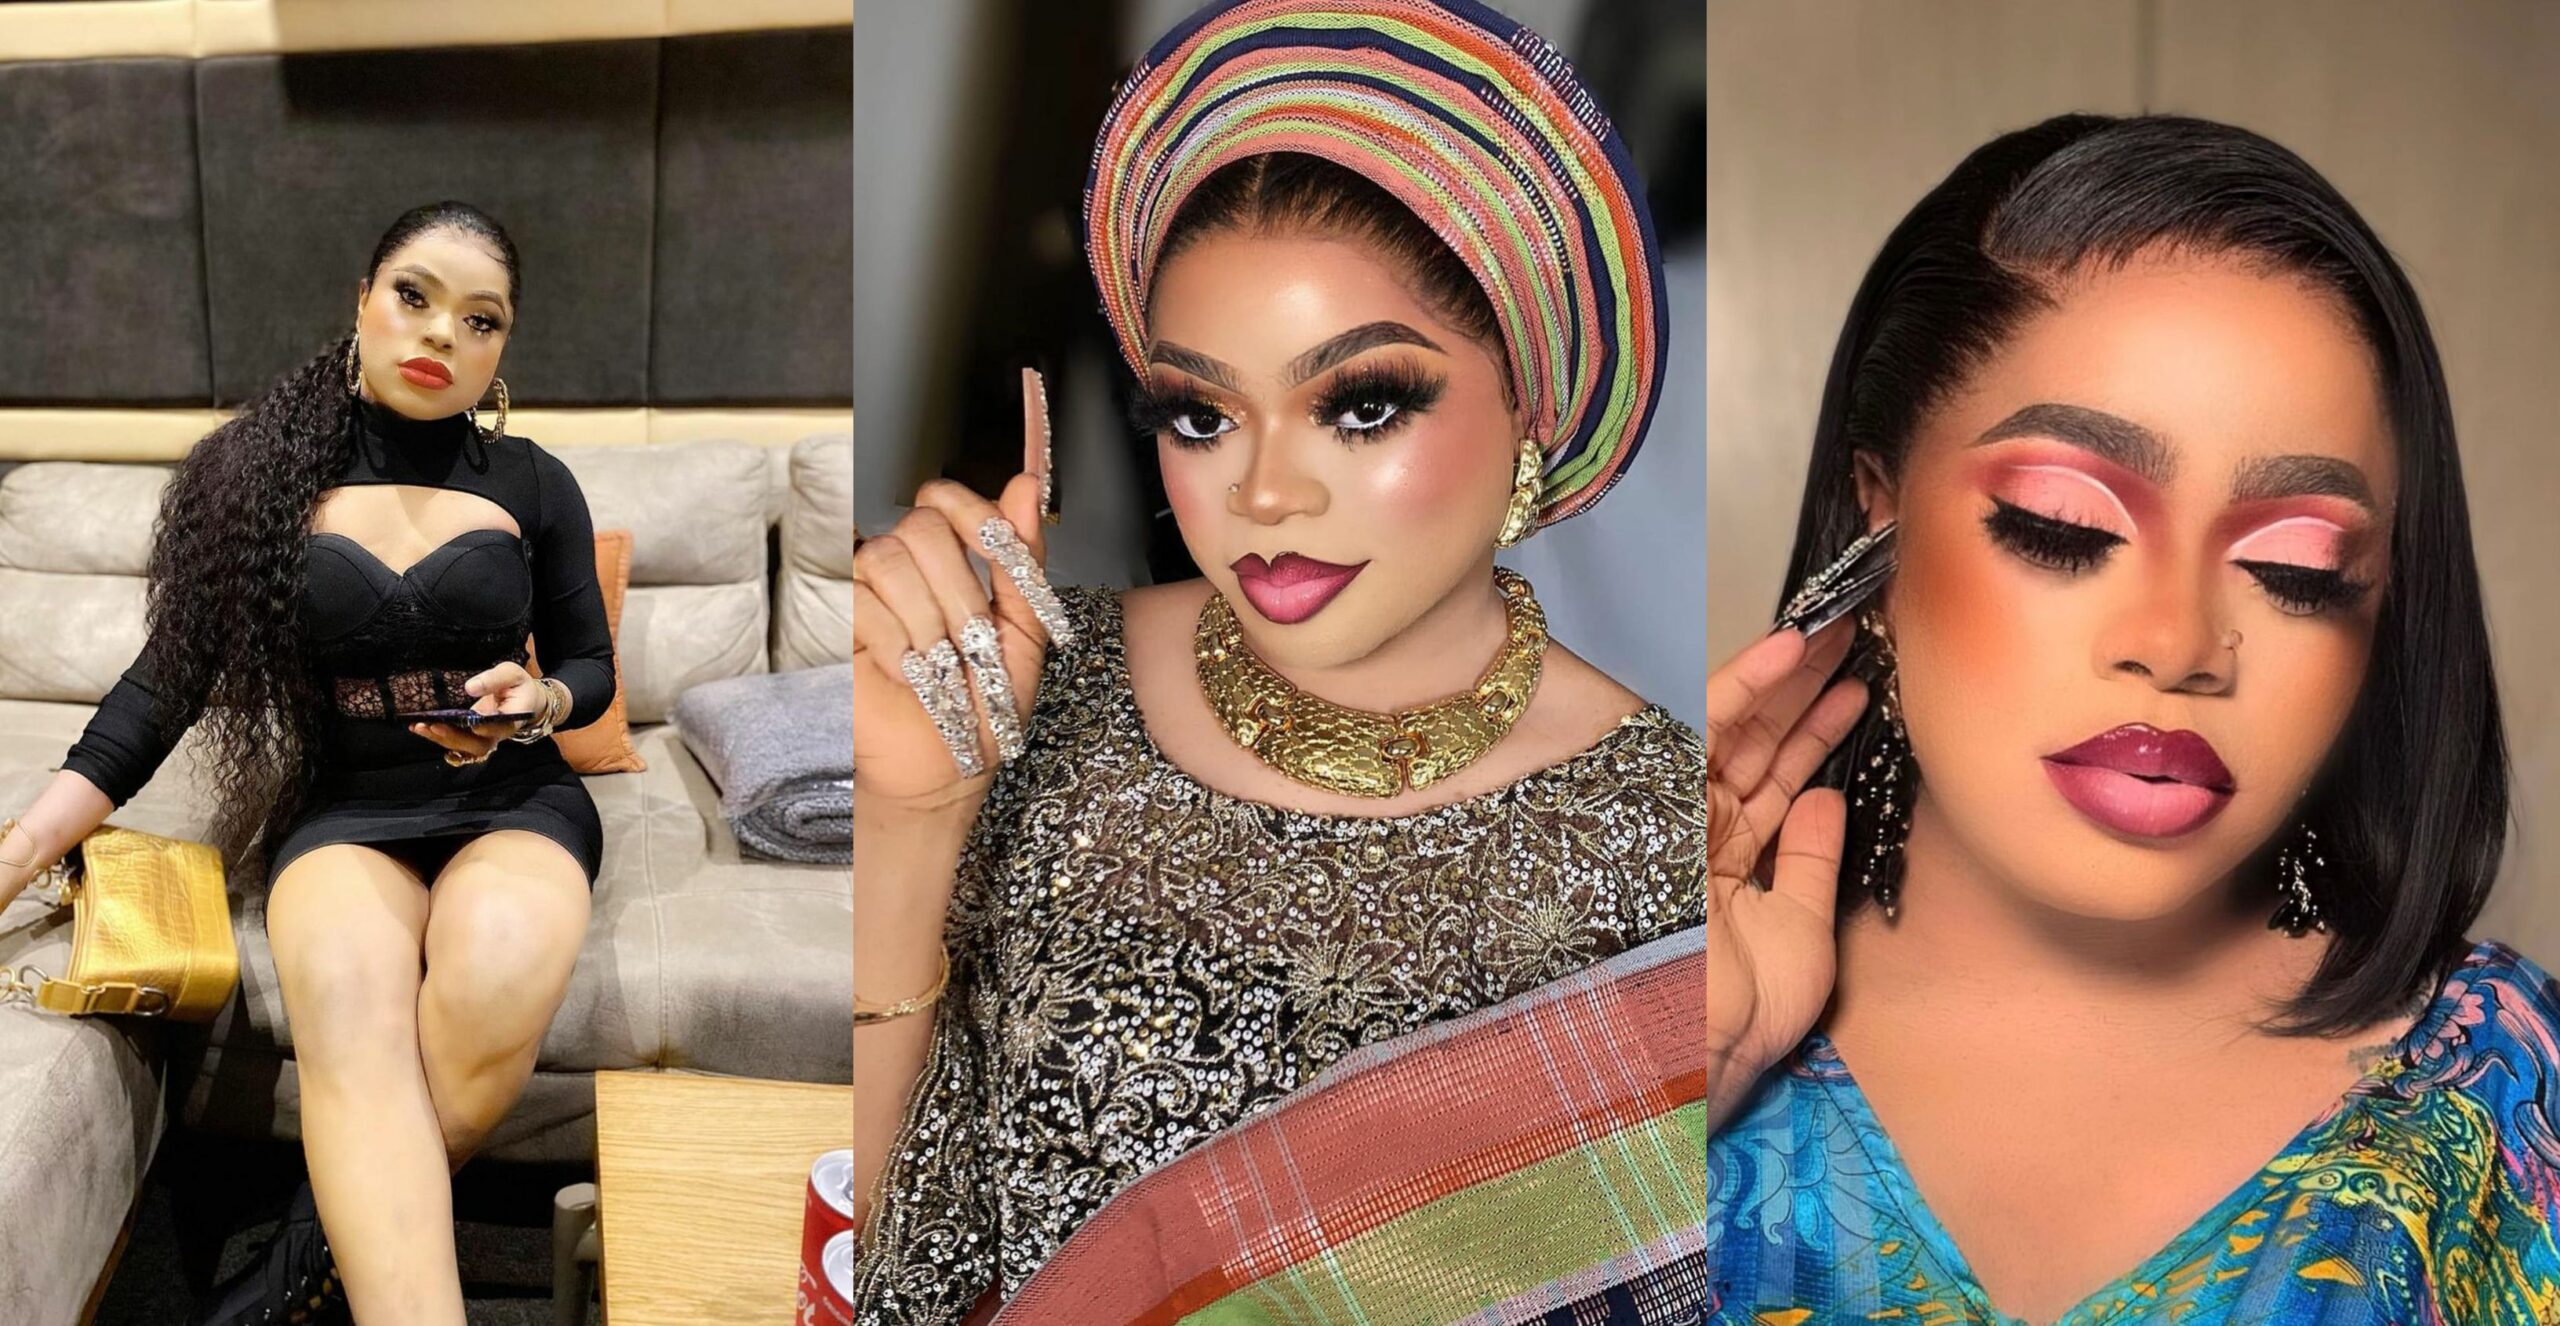 Please Pray for me- Bobrisky calls for prayer as he is set to undergo surgery to be a "Woman"